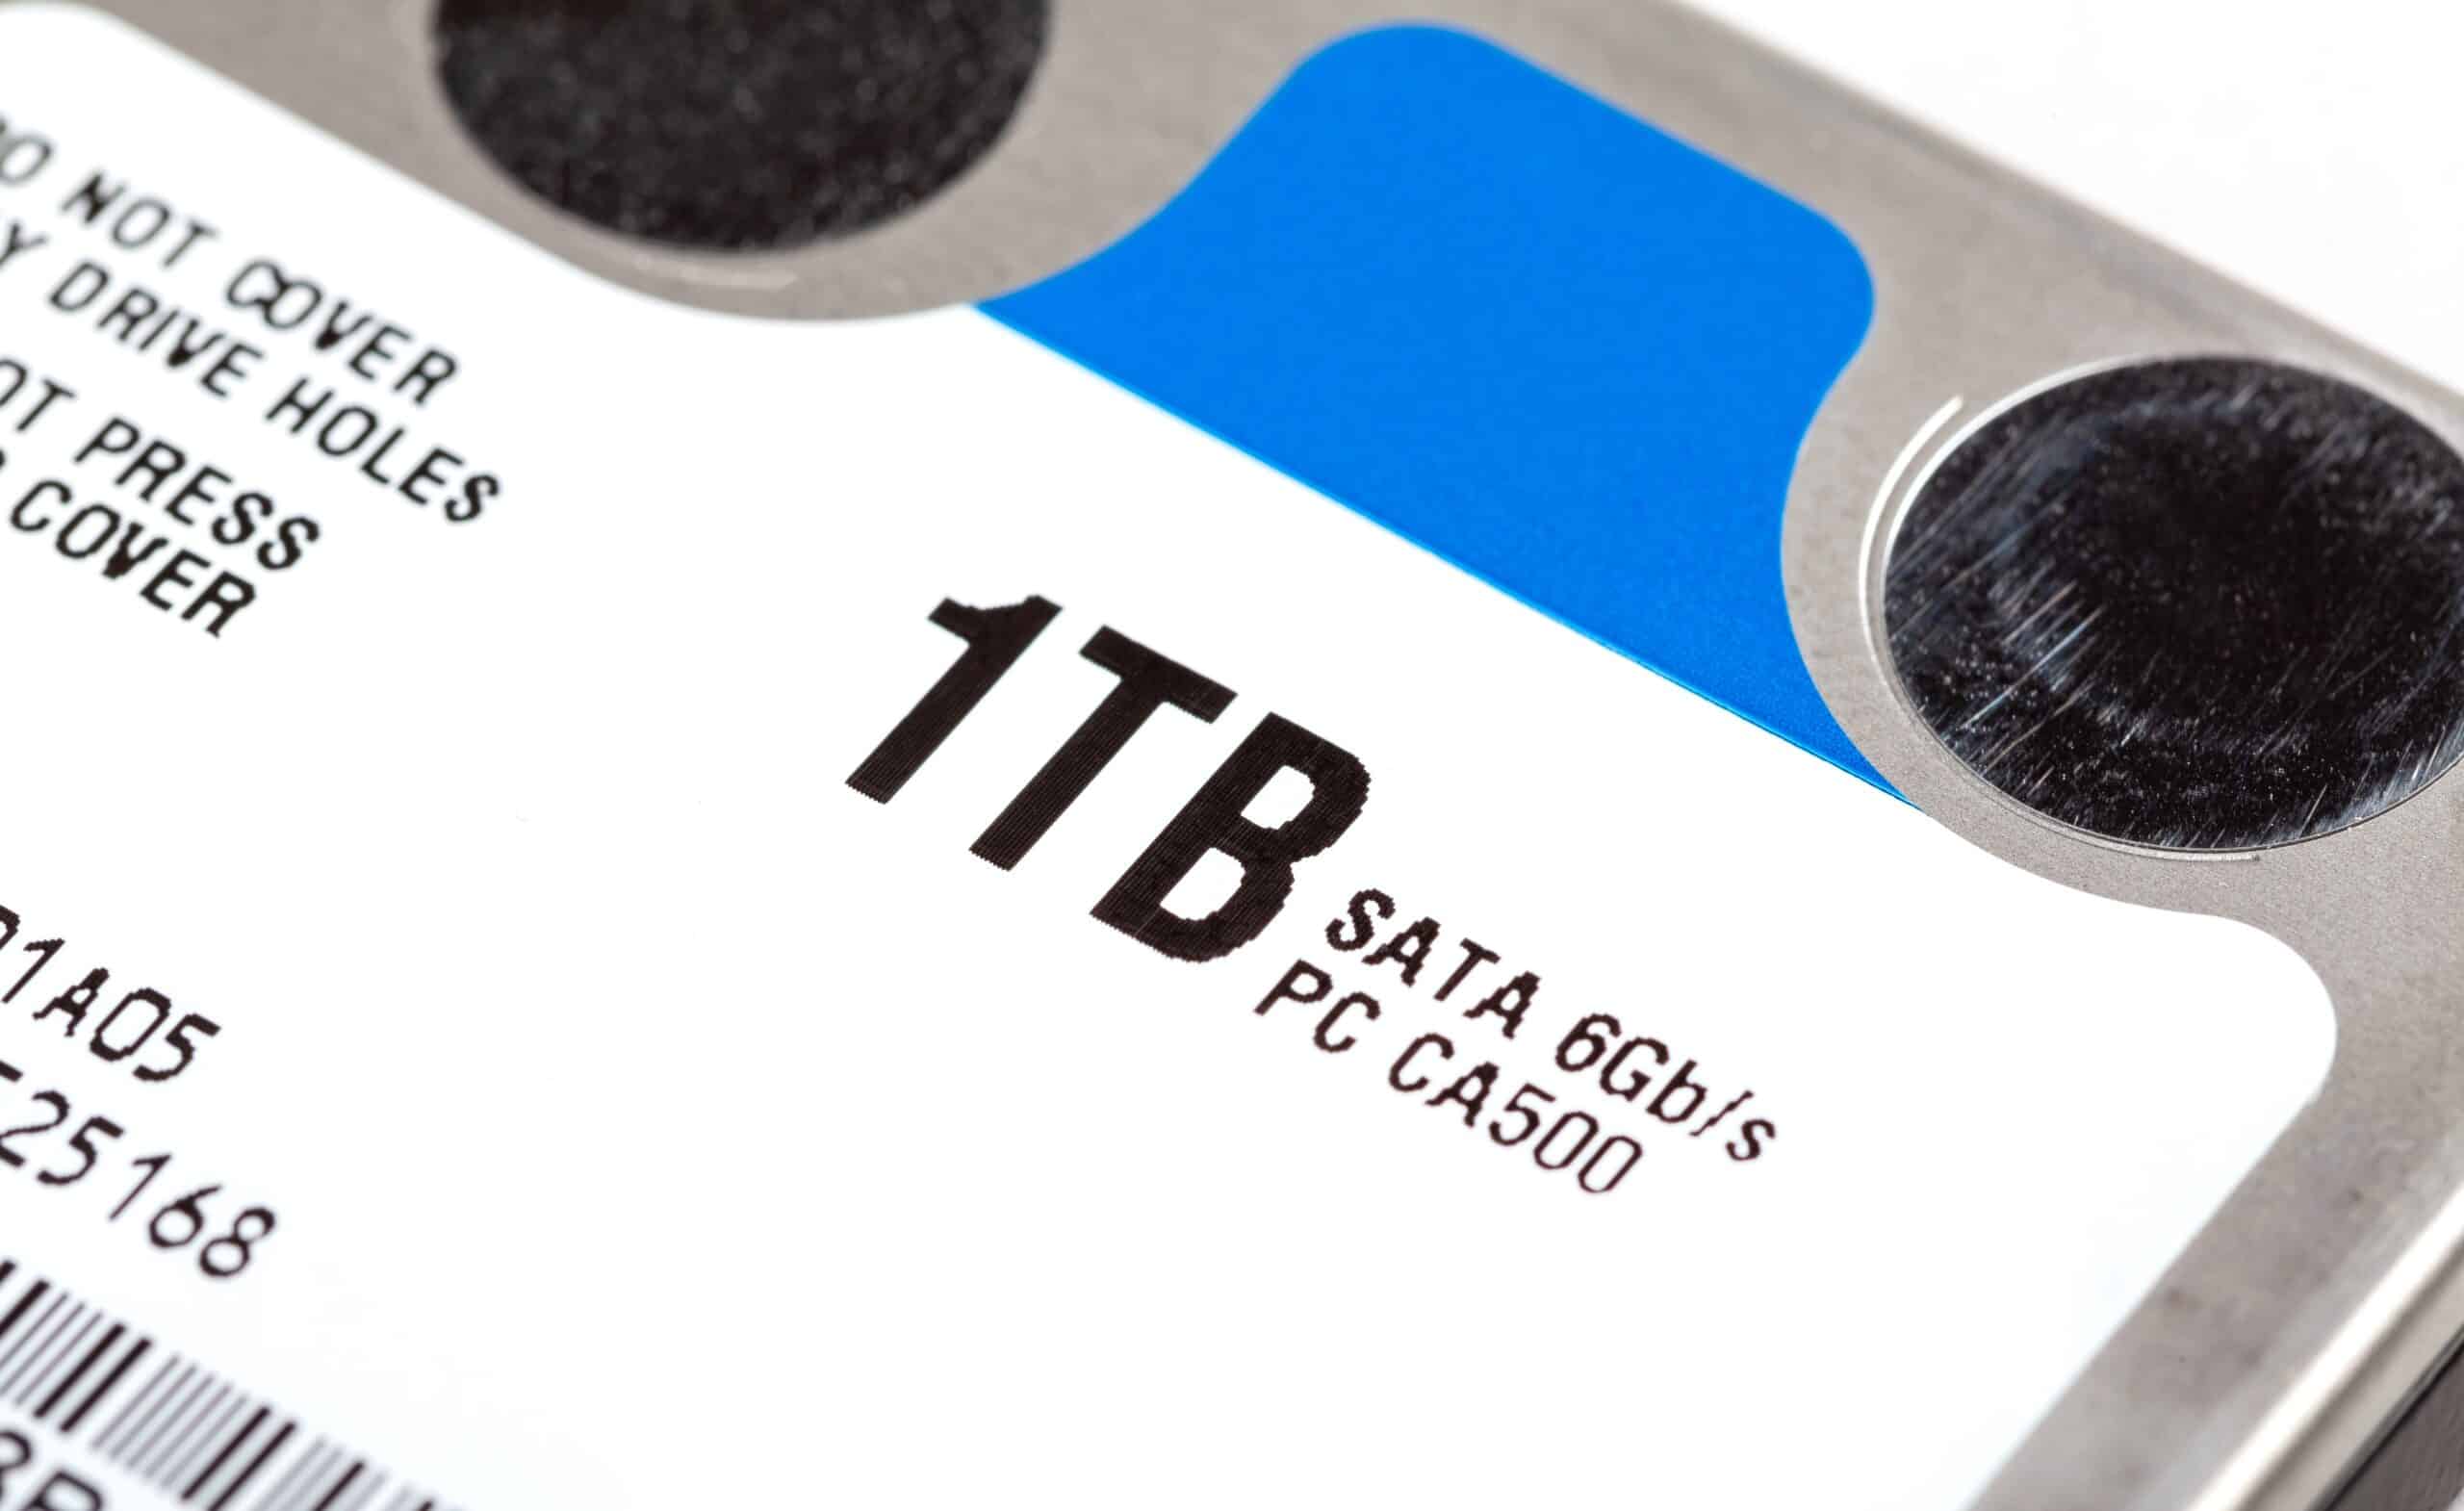 Extreme upclose of 1 TB hard disk drive (HDD) storage space